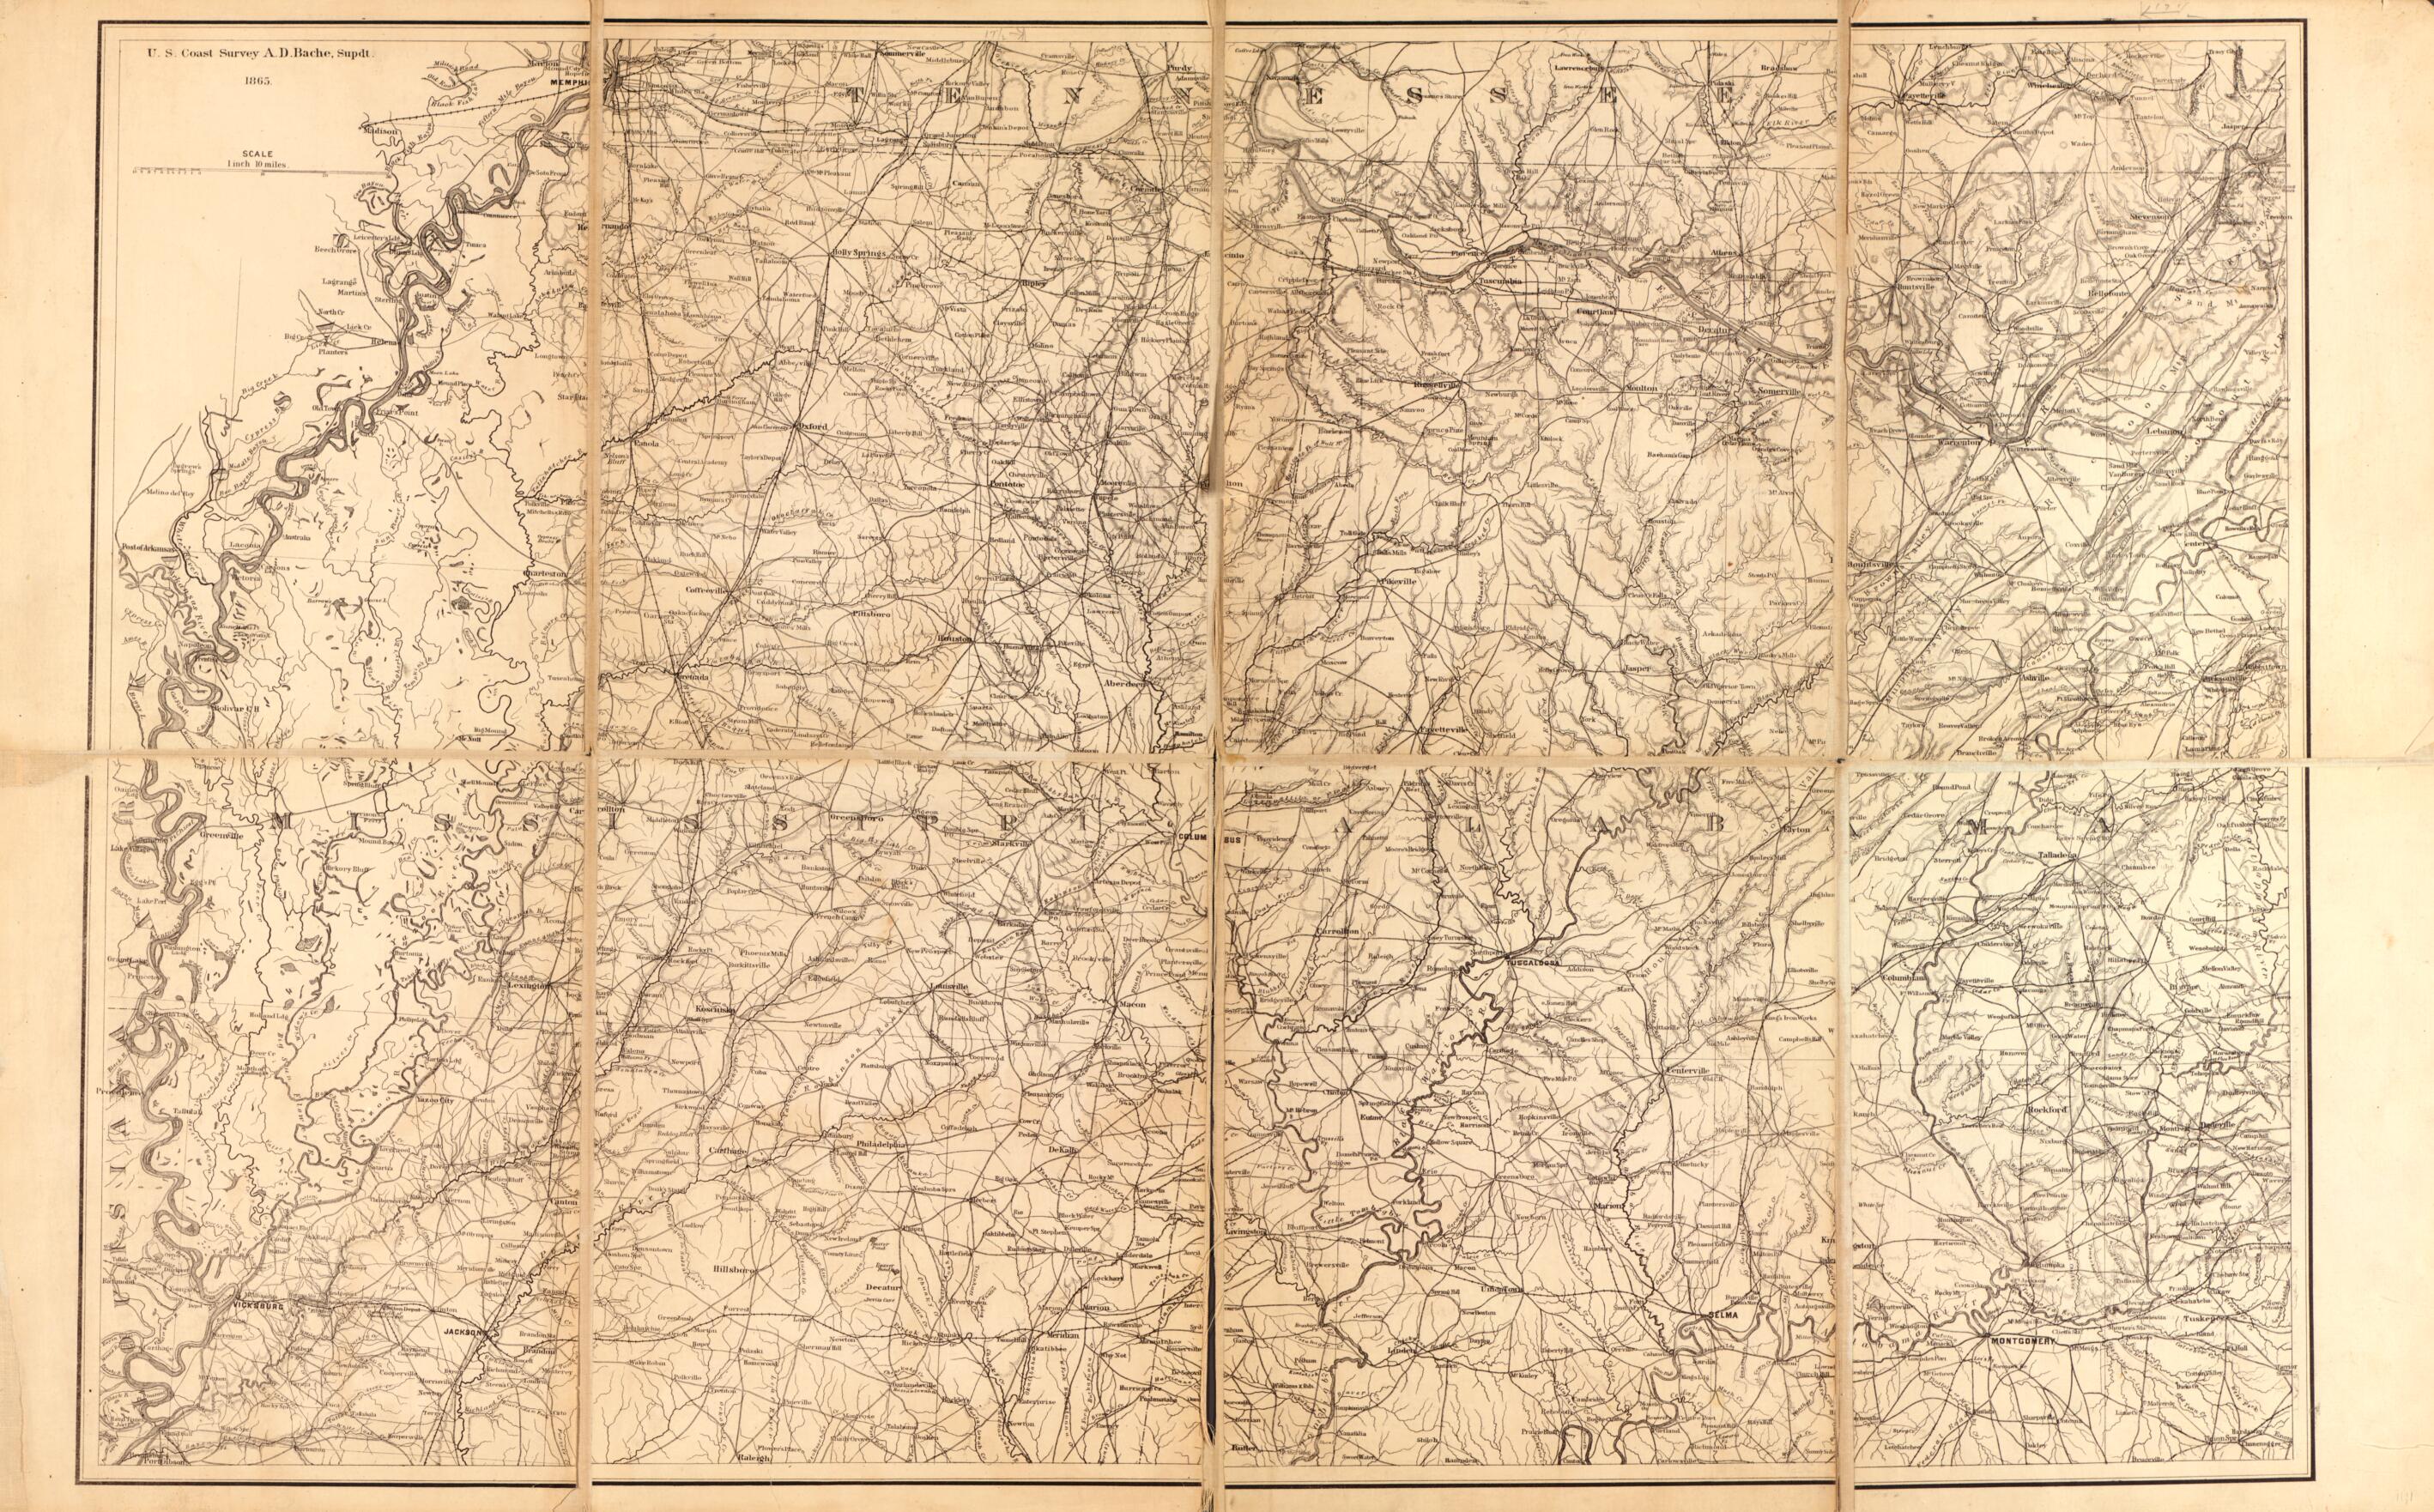 This old map of Northern Mississippi and Alabama from 1865 was created by A. Lindenkohl,  United States Coast Survey in 1865